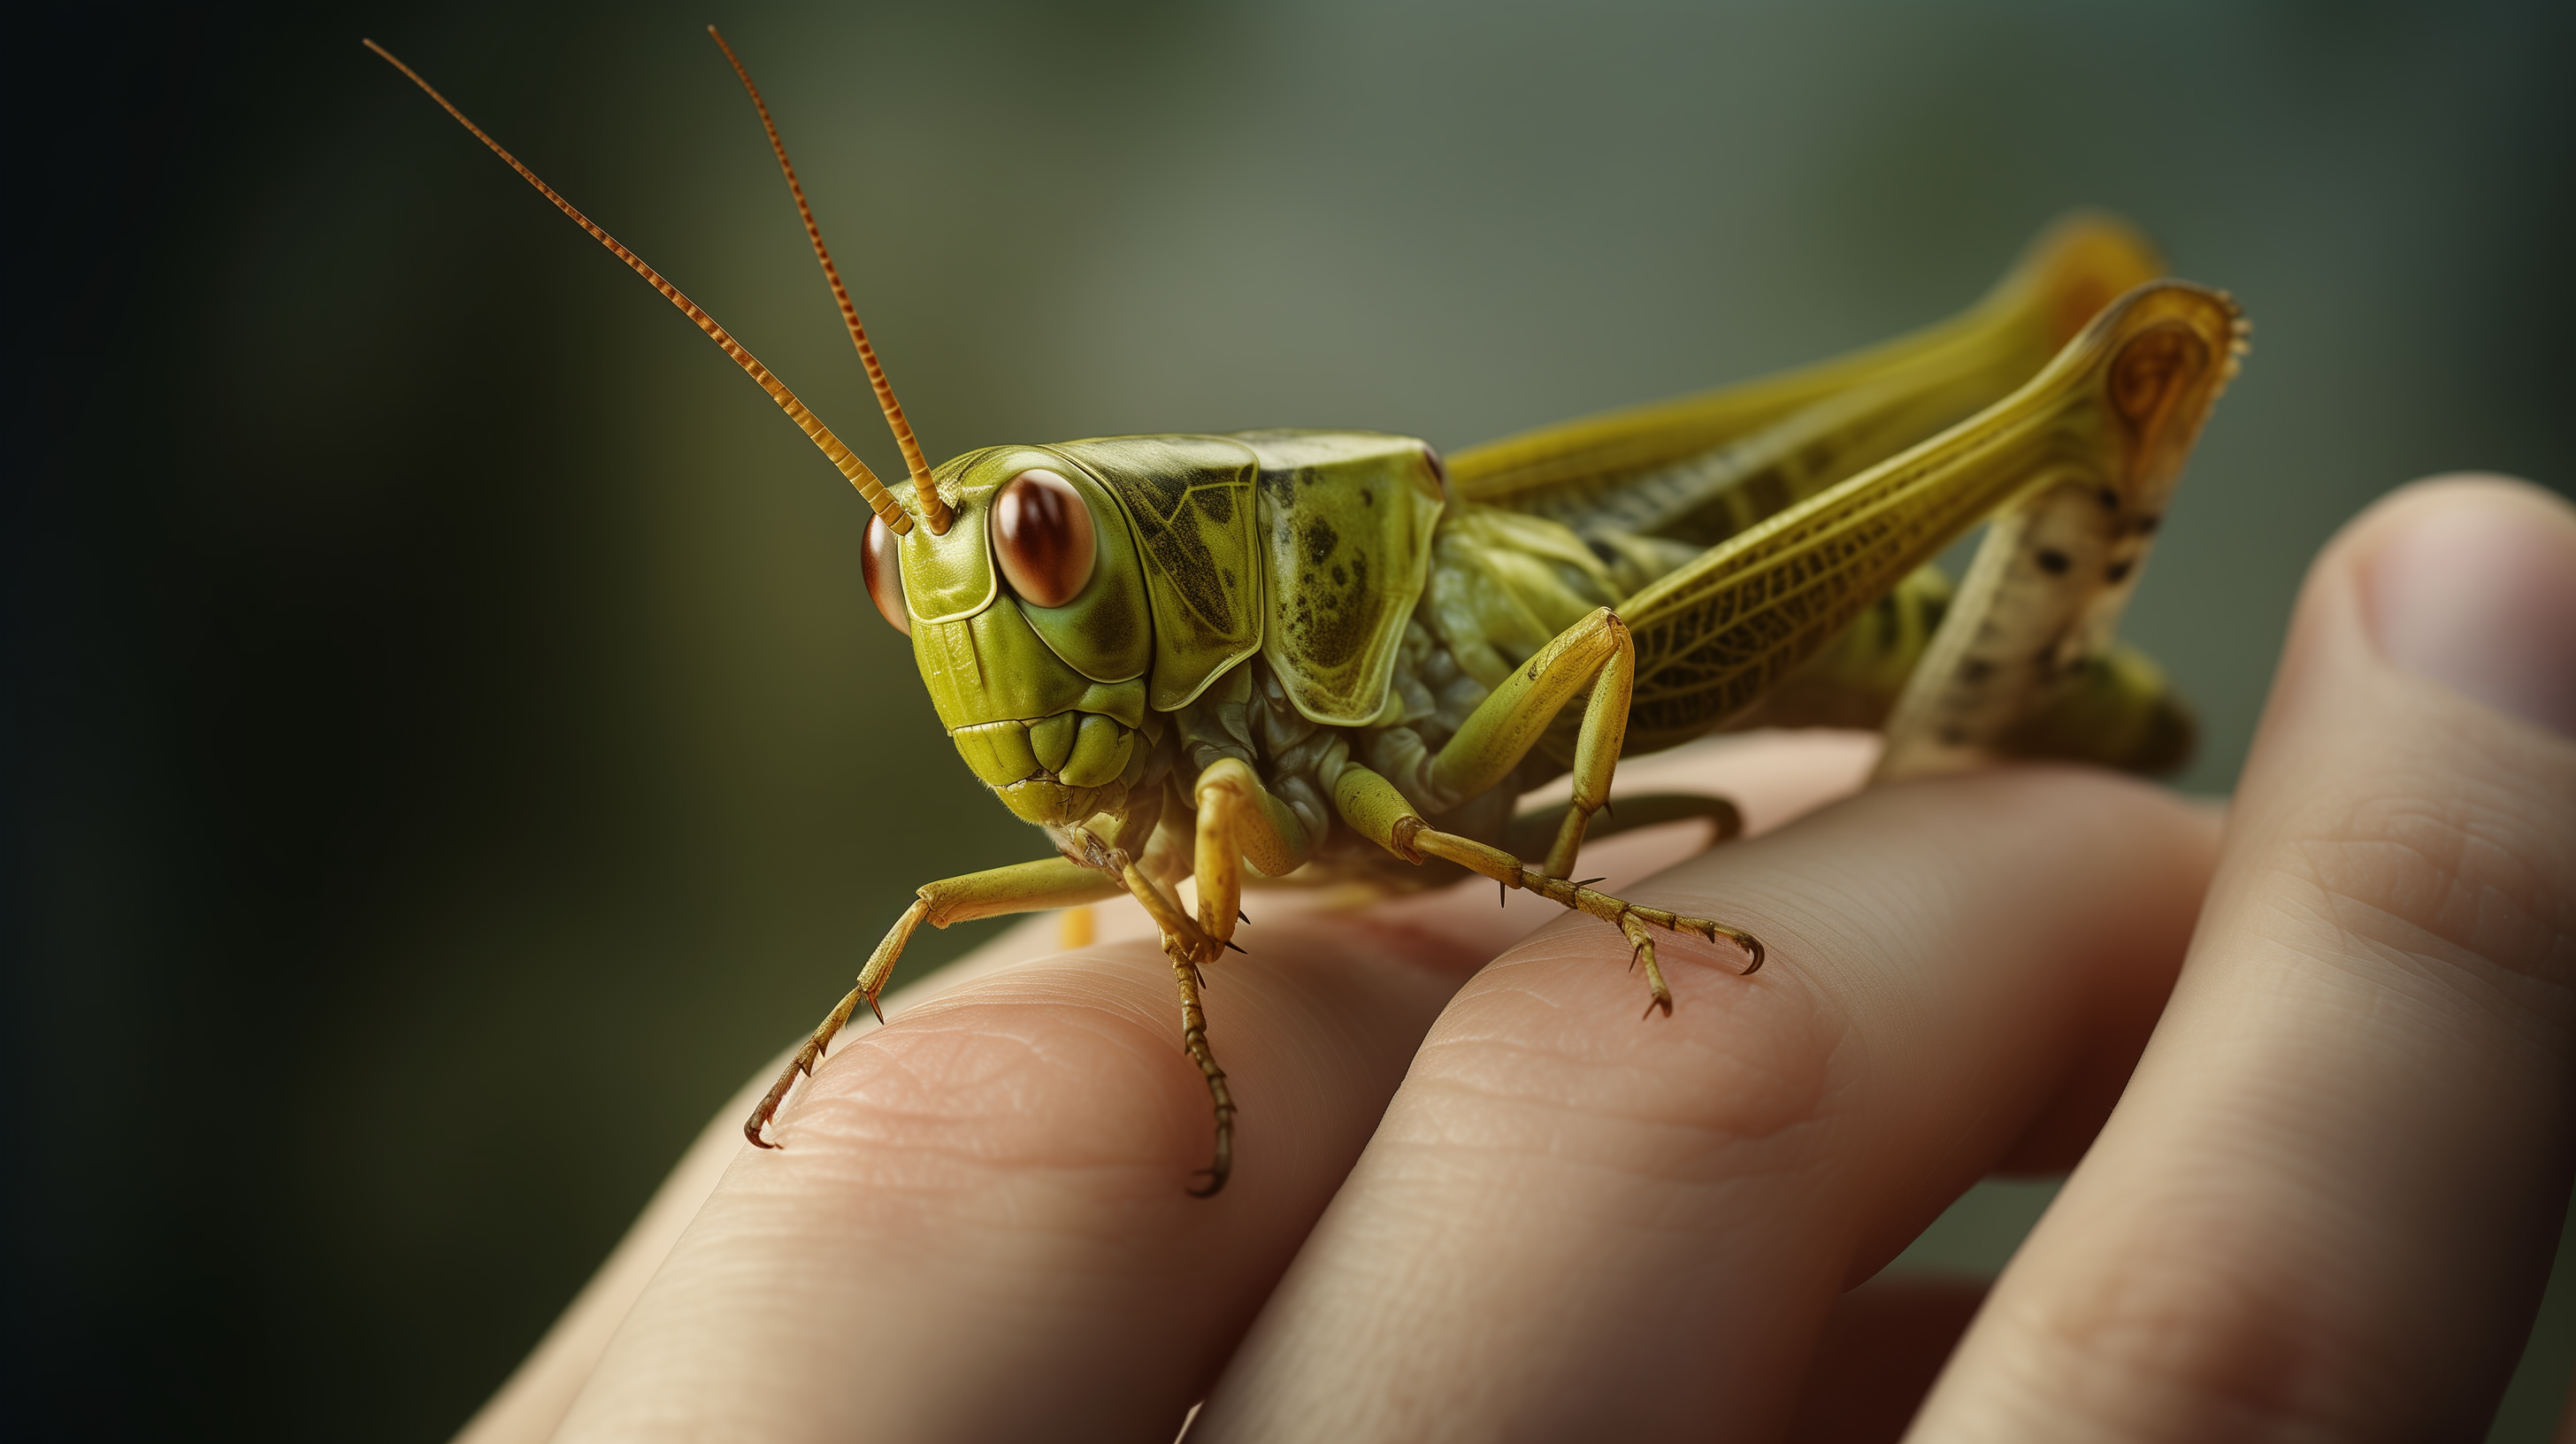 HD wallpaper of a detailed grasshopper perched on human fingers, showcasing its vibrant green texture against a soft-focus background.